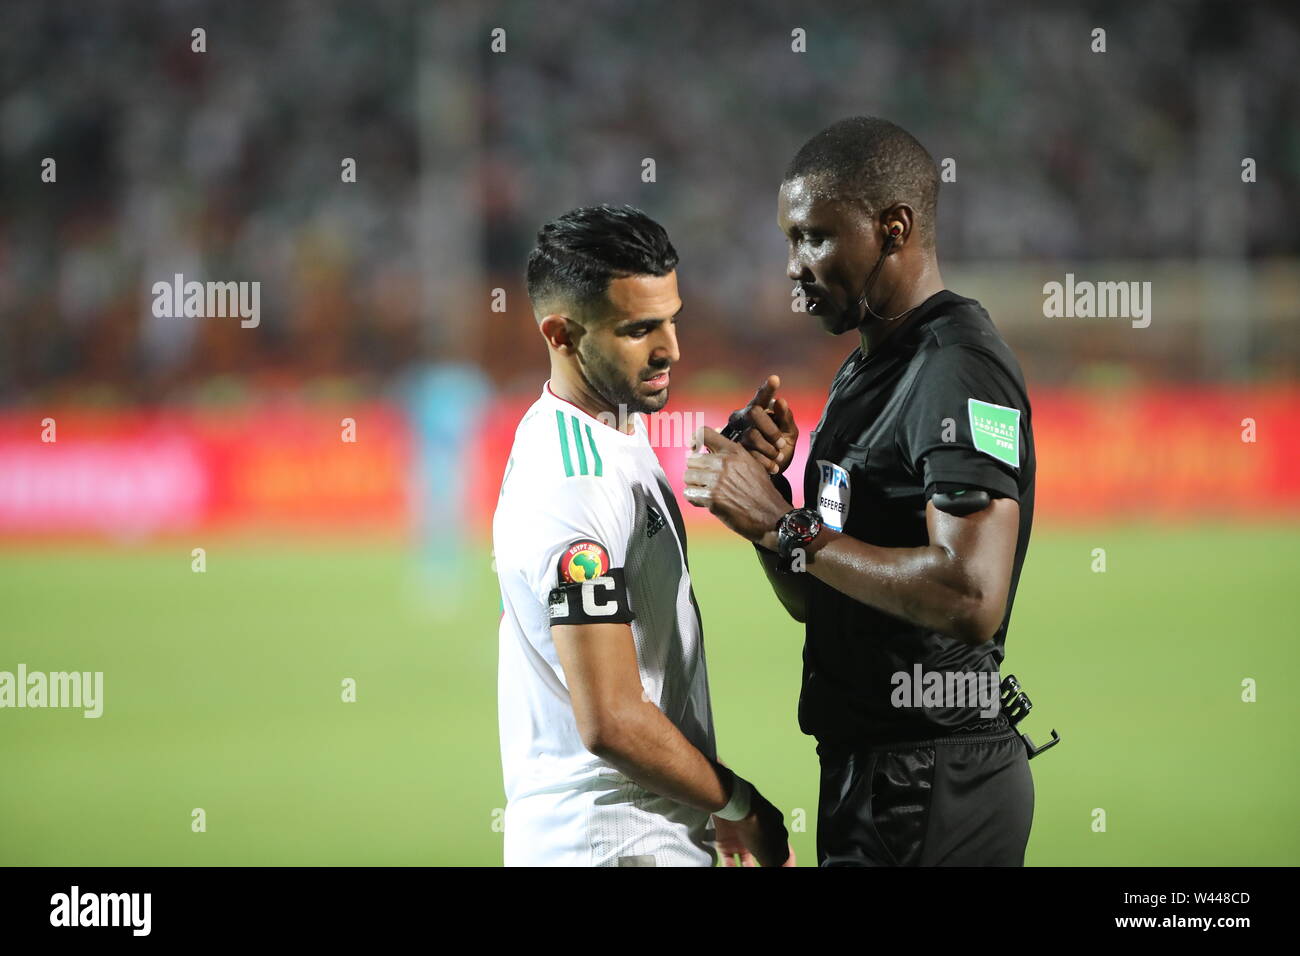 Cairo, Egypt. 19th July, 2019. Algeria's Riyad Mahrez speaks with the referee during the 2019 Africa Cup of Nations final soccer match between Senegal and Algeria at the Cairo International Stadium. Credit: Omar Zoheiry/dpa/Alamy Live News Stock Photo